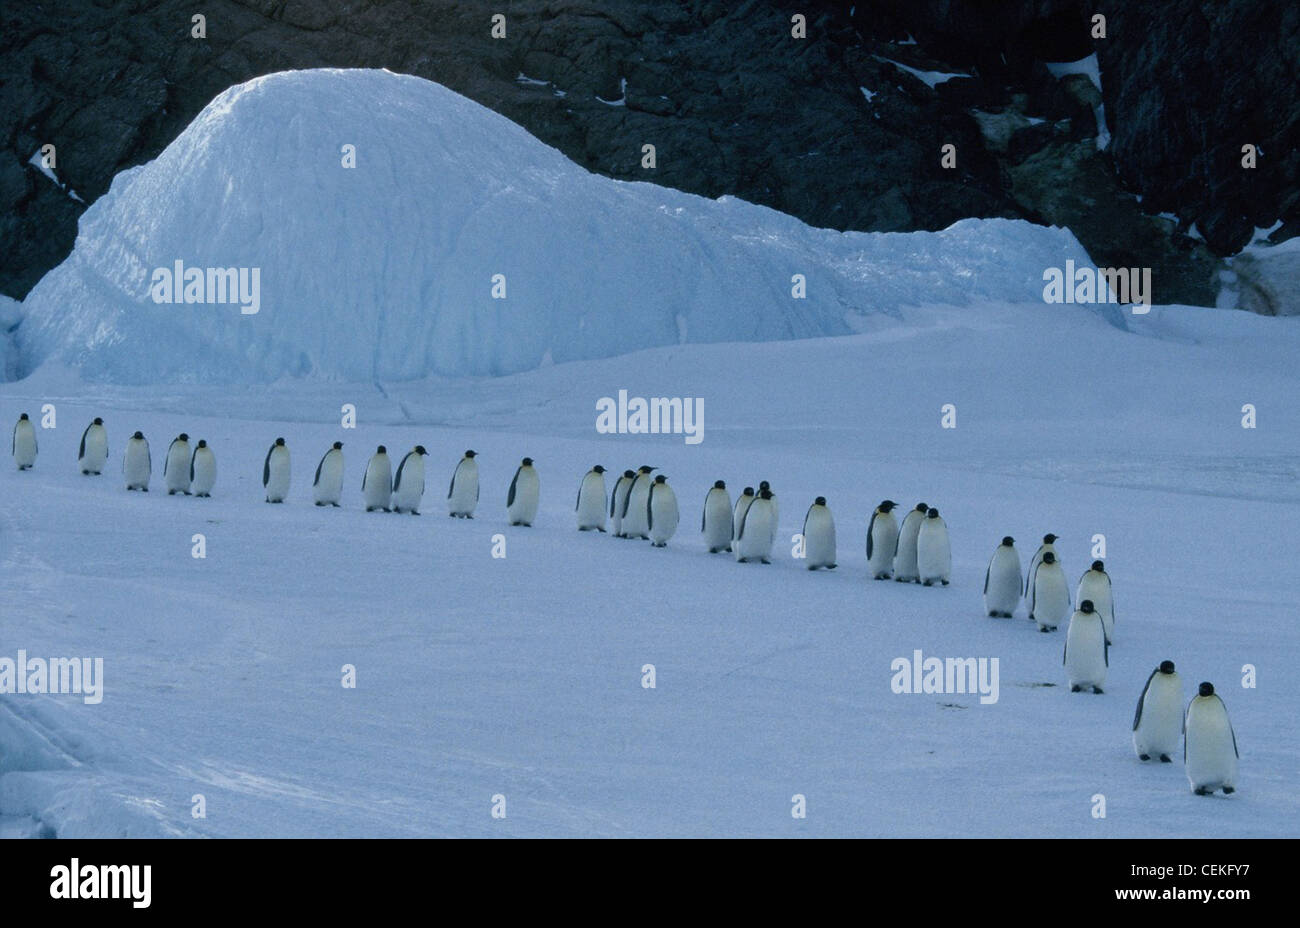 MARCH OF THE PENGUINS (2005) LUC JACQUET (DIR) 001 MOVIESTORE COLLECTION LTD Stock Photo